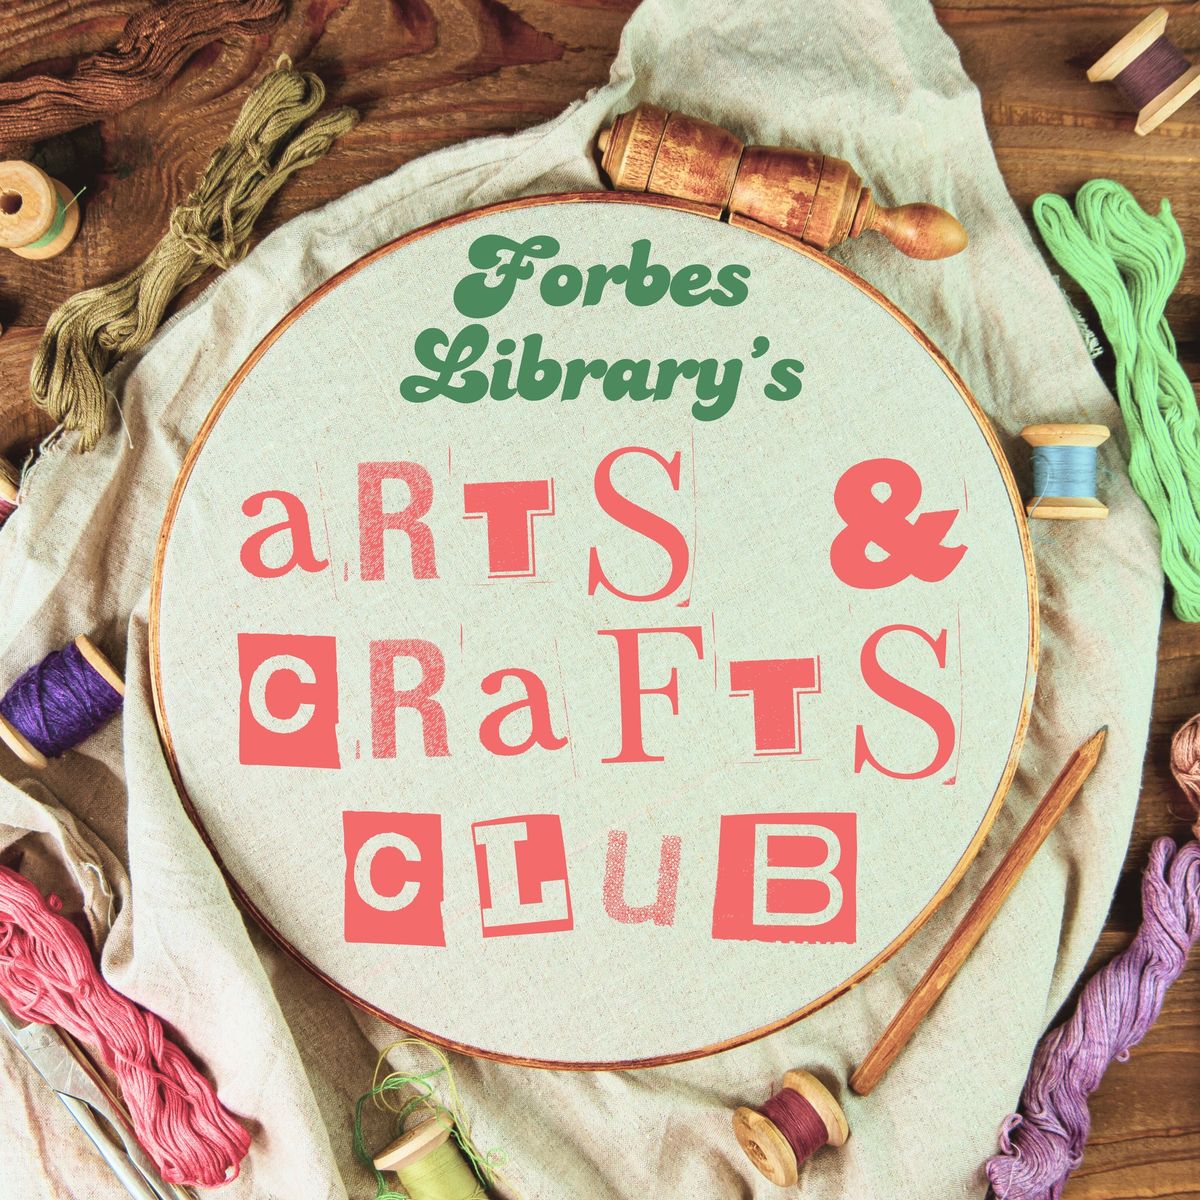 Drop-In Art Hangout, with Forbes Arts & Crafts Club